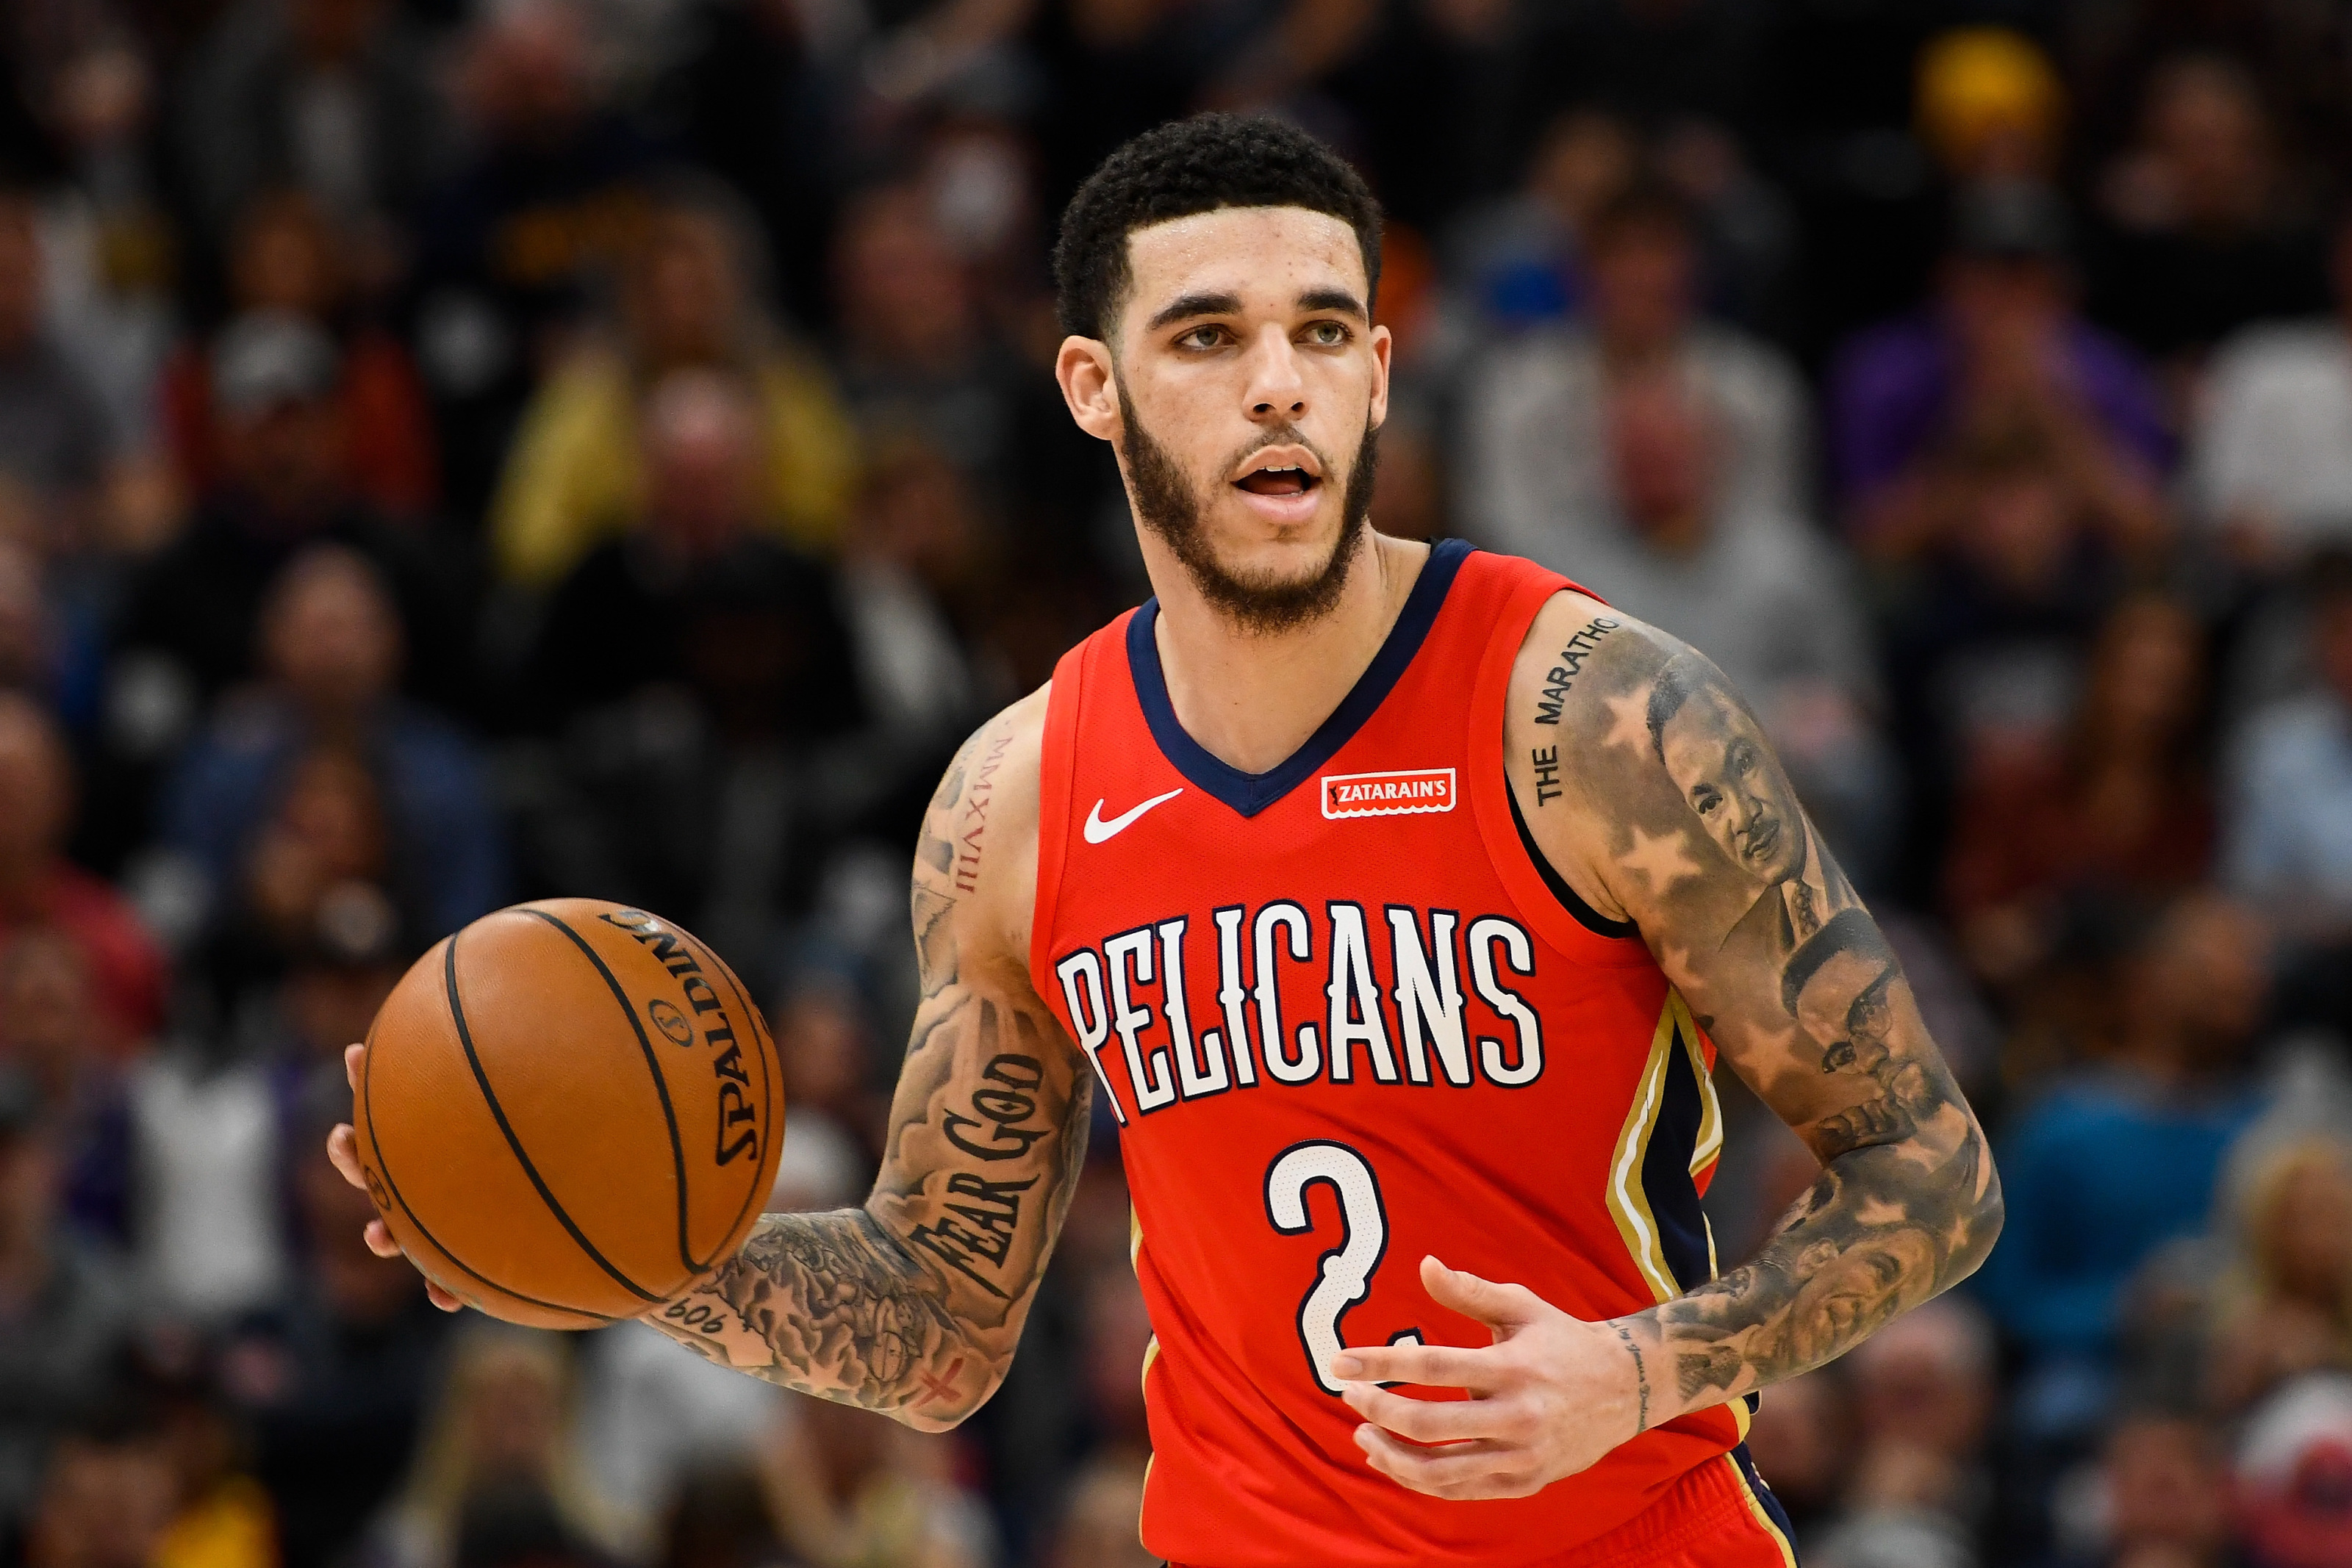 New Orleans Pelicans: Lonzo Ball's Future Is Now In the Air